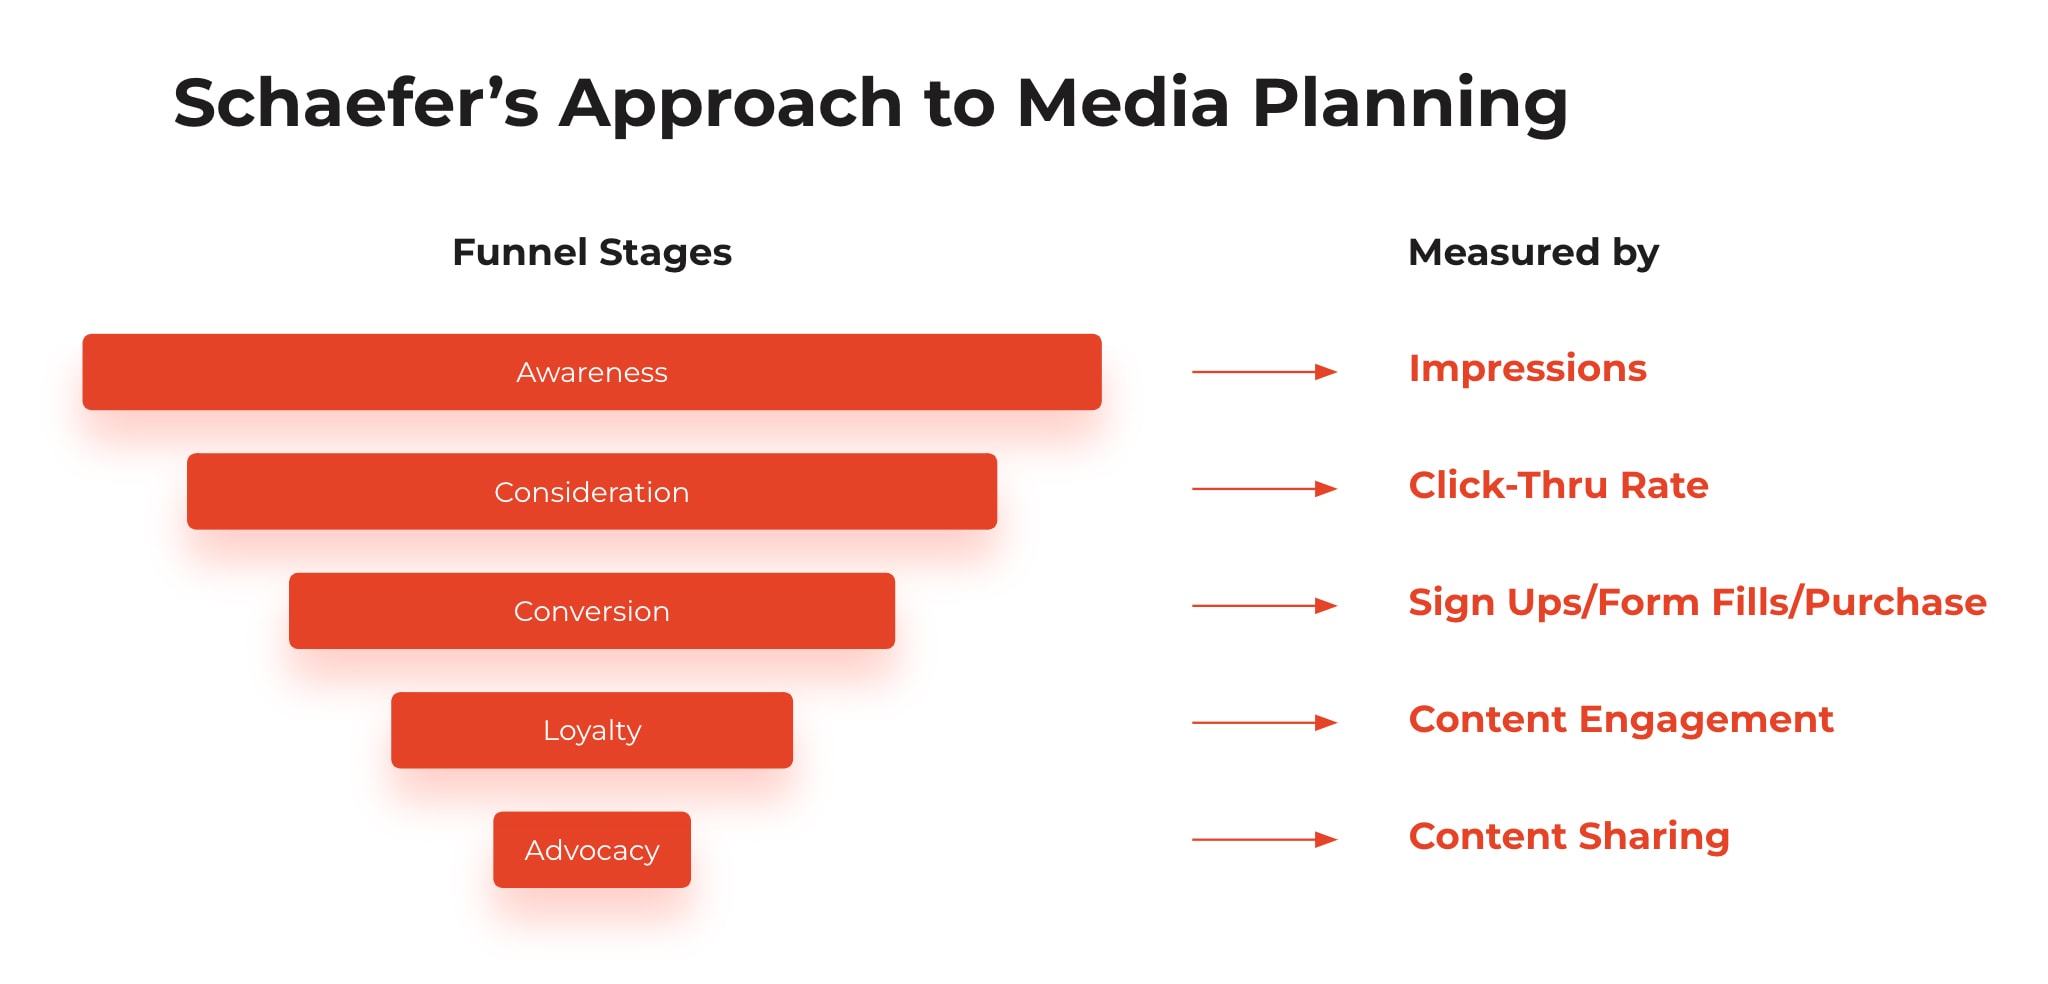 Schaefer's Approach to Media Planning